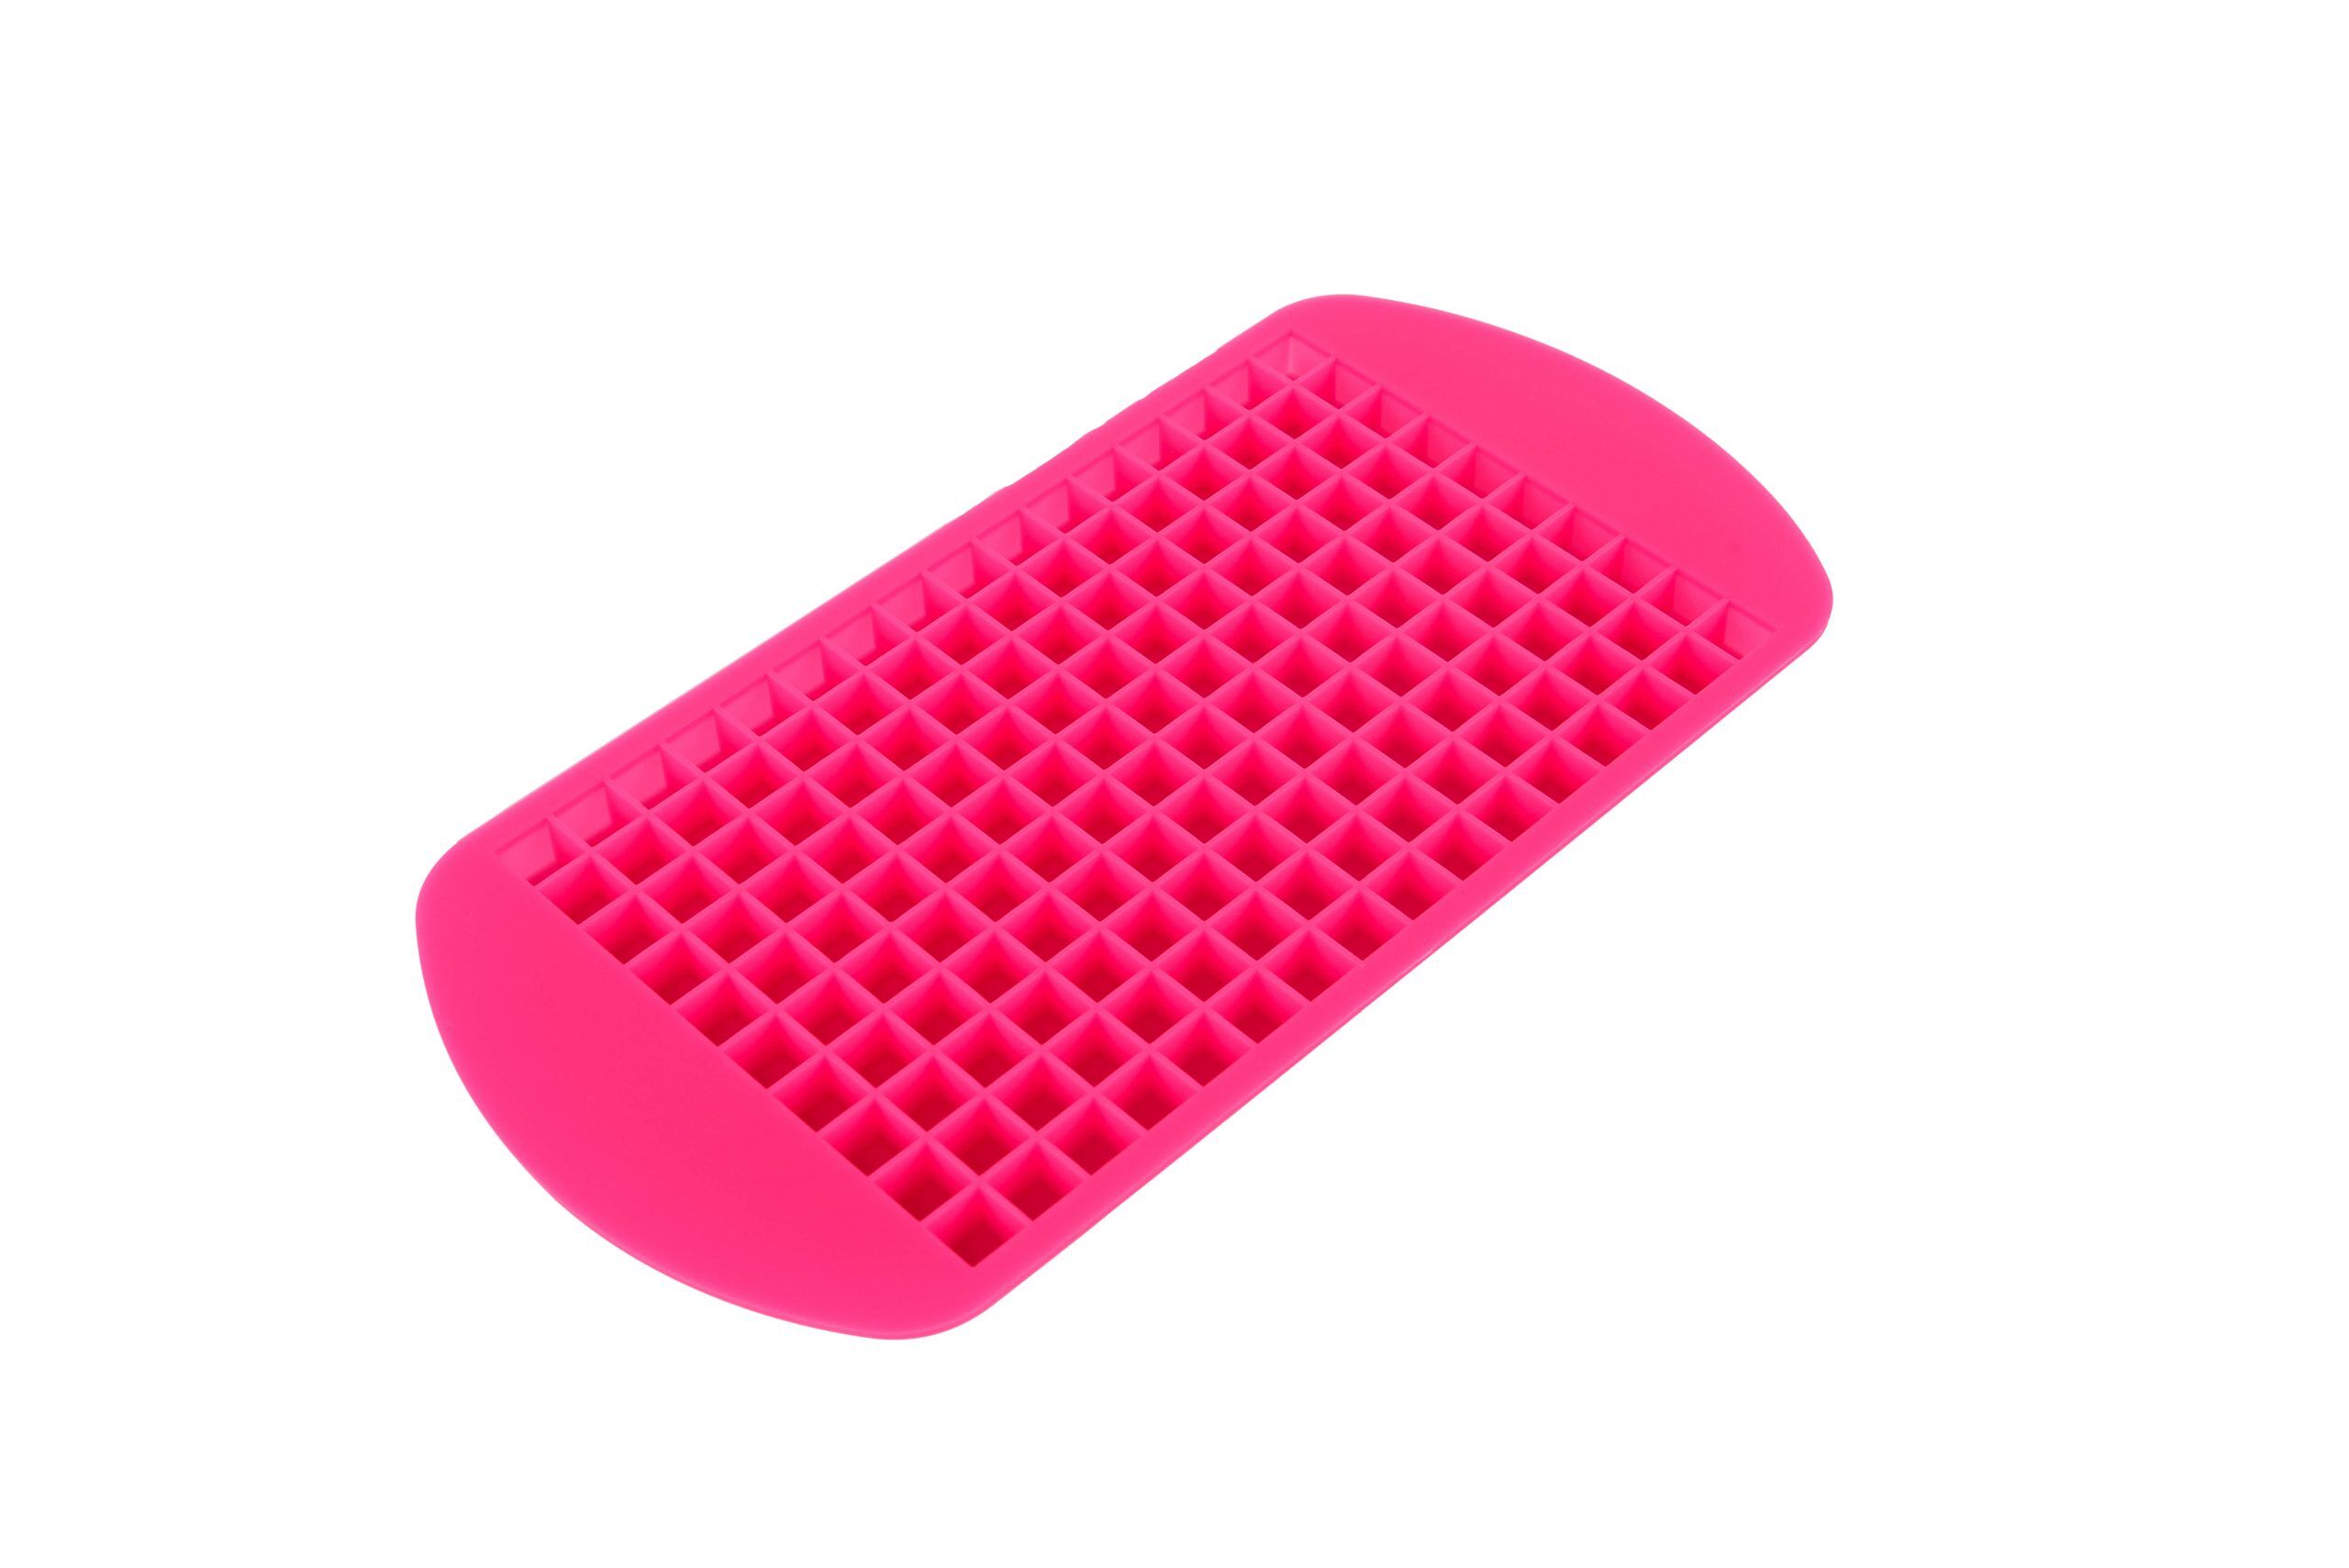 4 Colors 24 Grids Small Fruits Mold Ice Maker For Ice Cube Making Silicone  Ice Cube With Lid Eco-Friendly Cavity Tray Ice Cubes